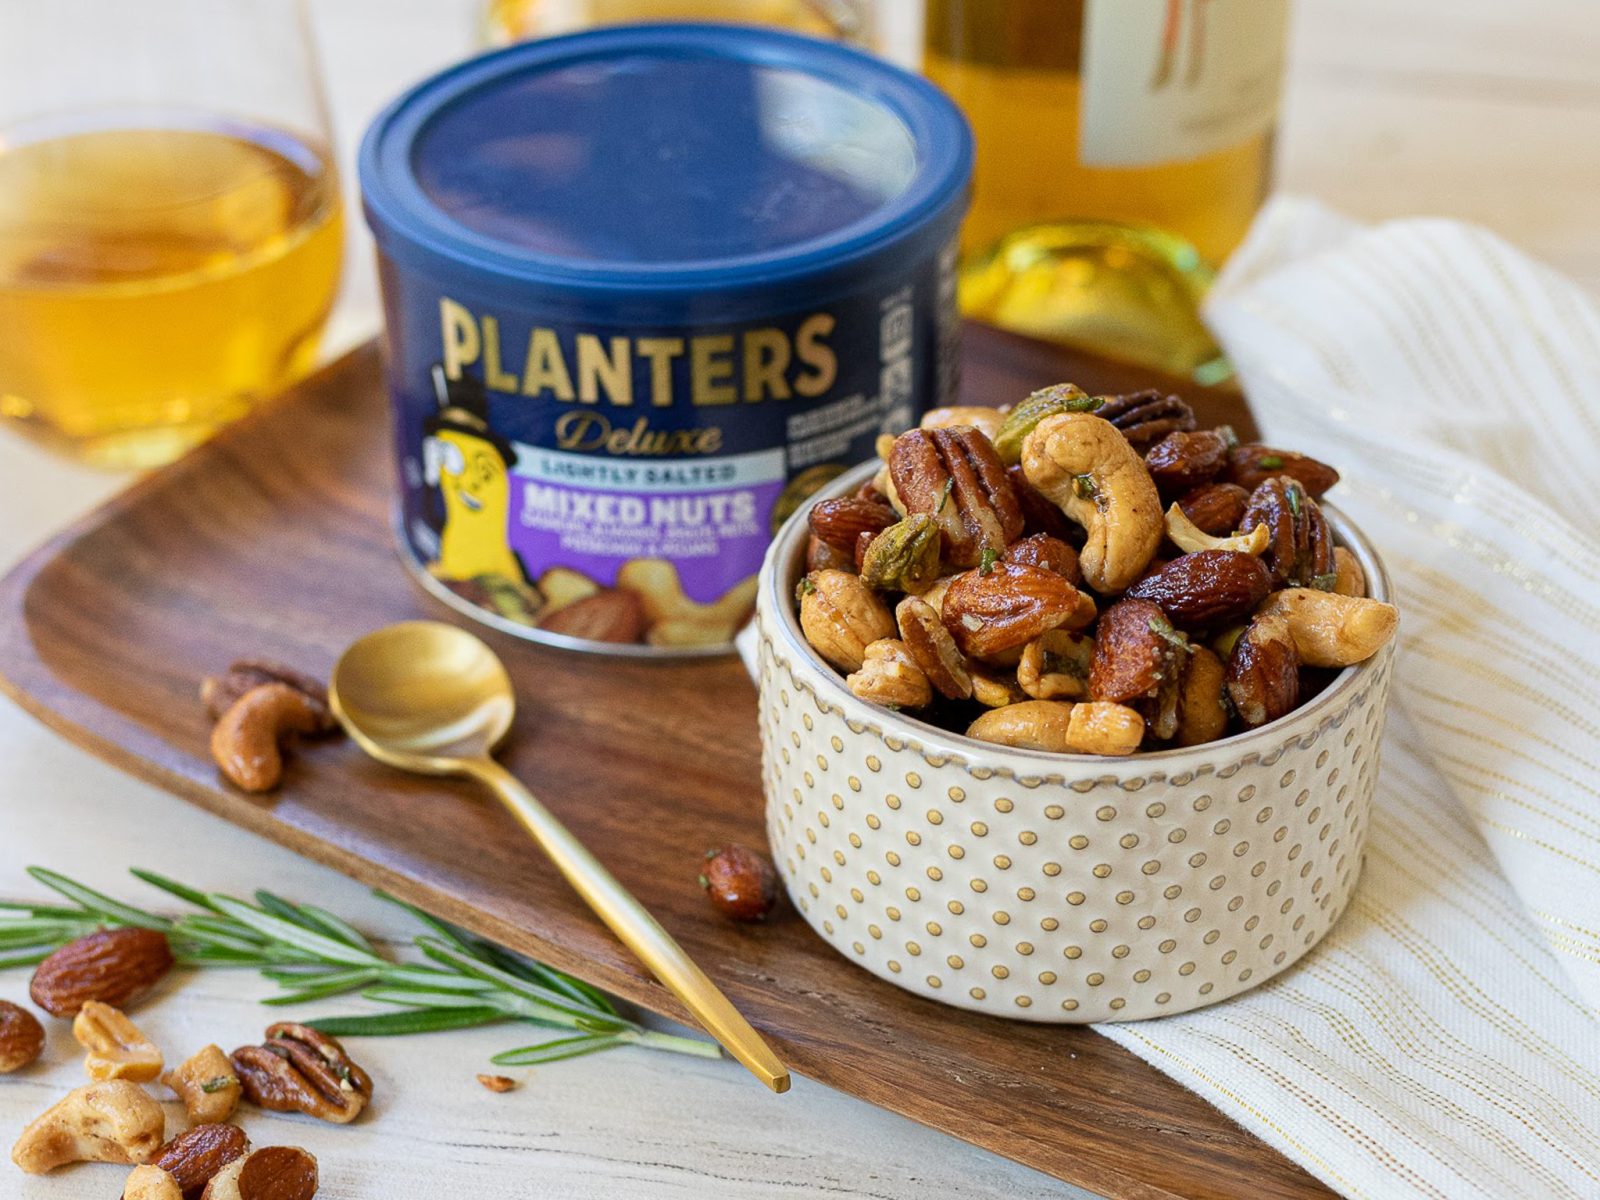 Celebrate The Good This Holiday With PLANTERS® Nuts